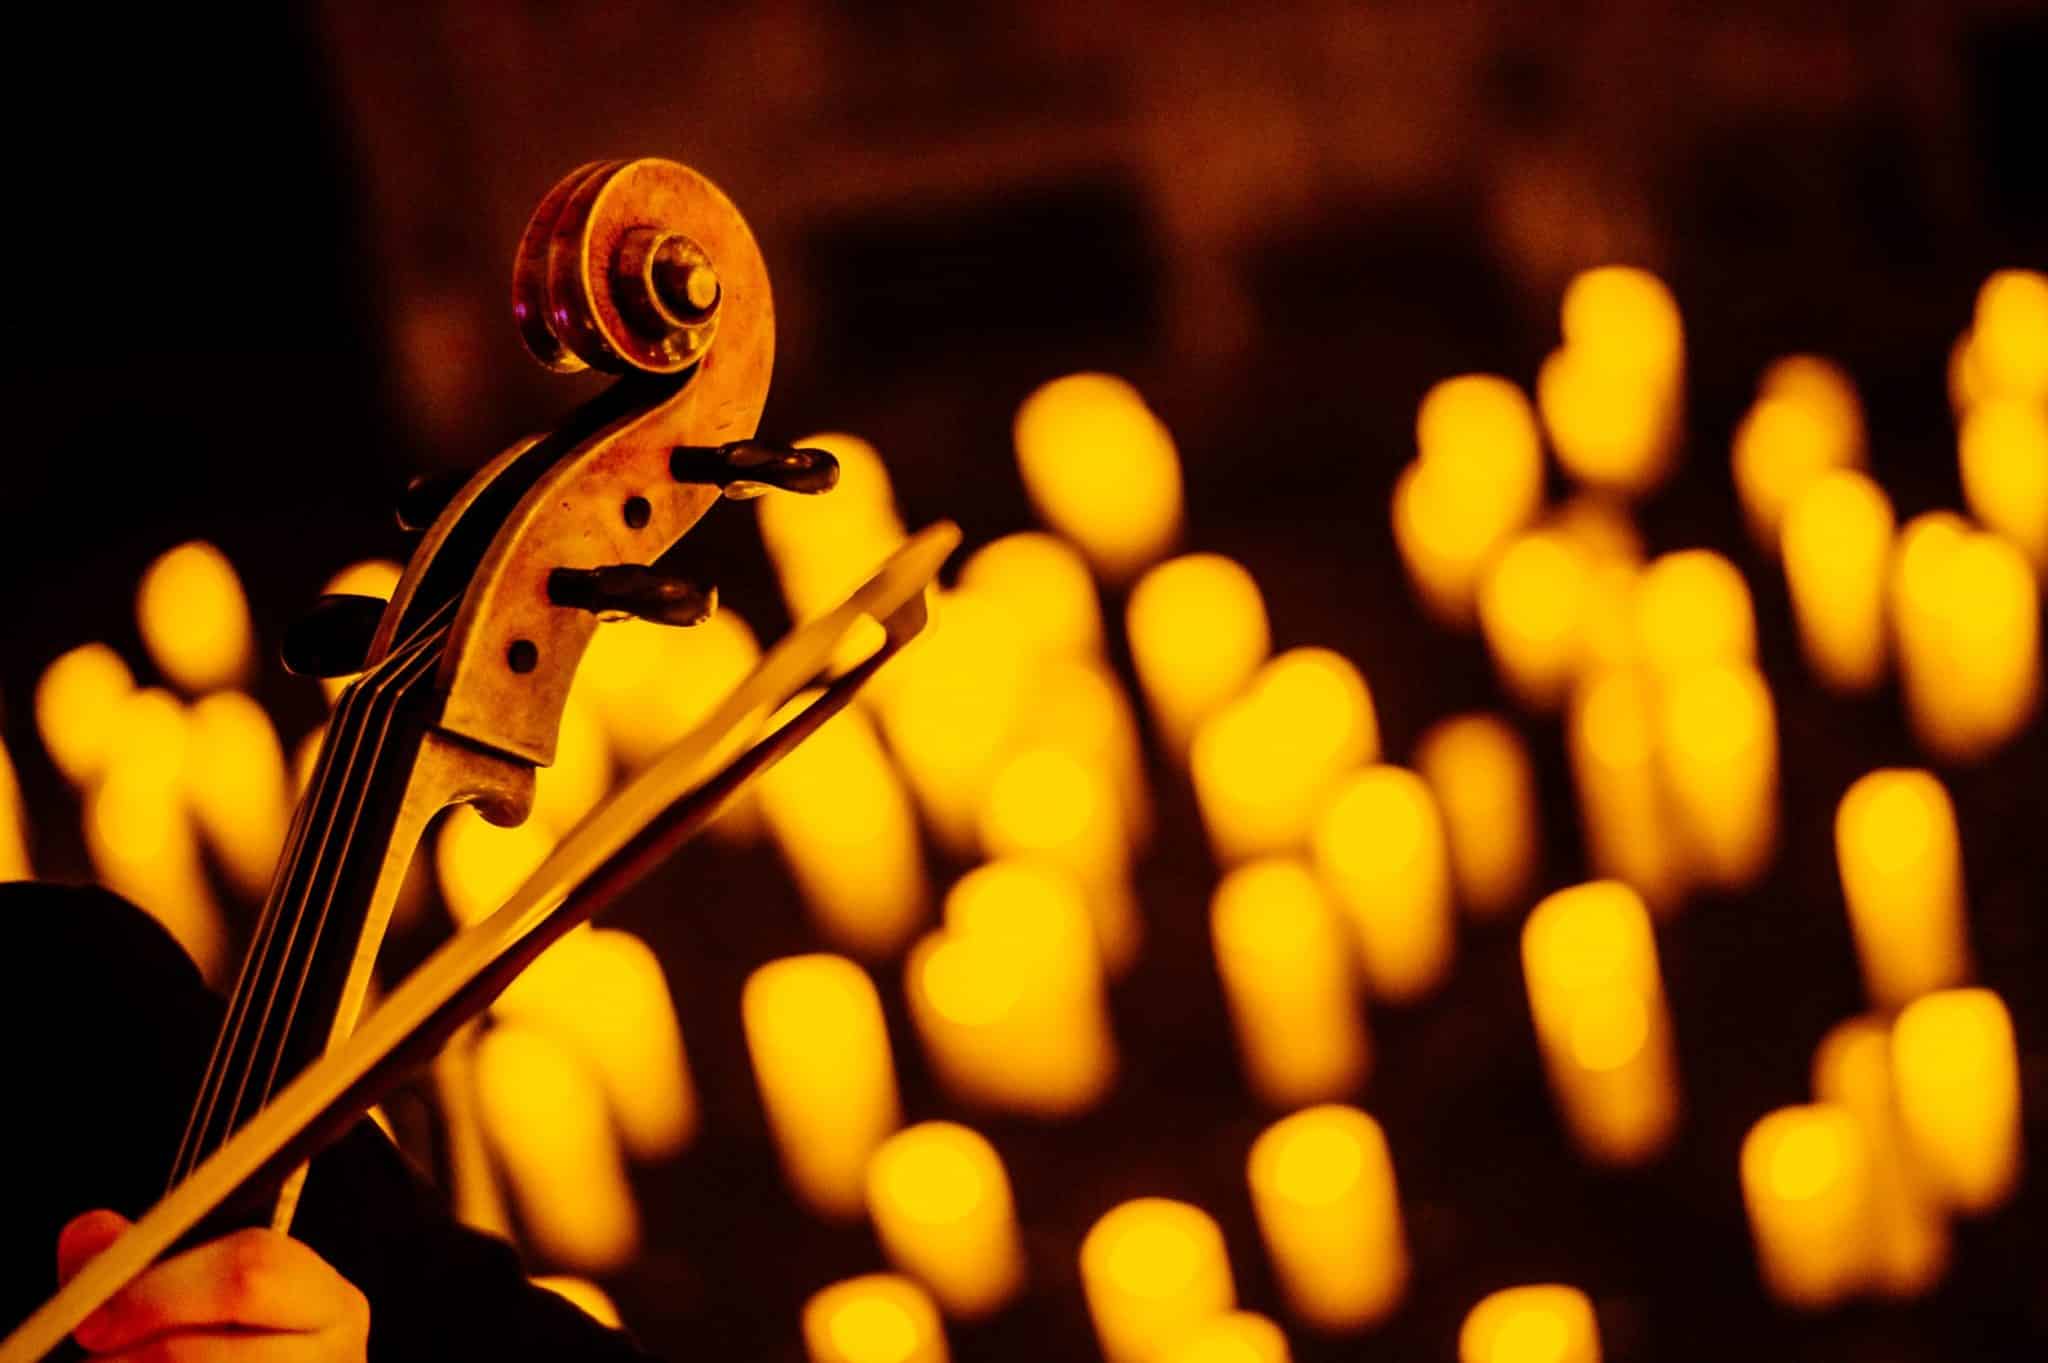 A close-up of the top of a violin with candles in the background.